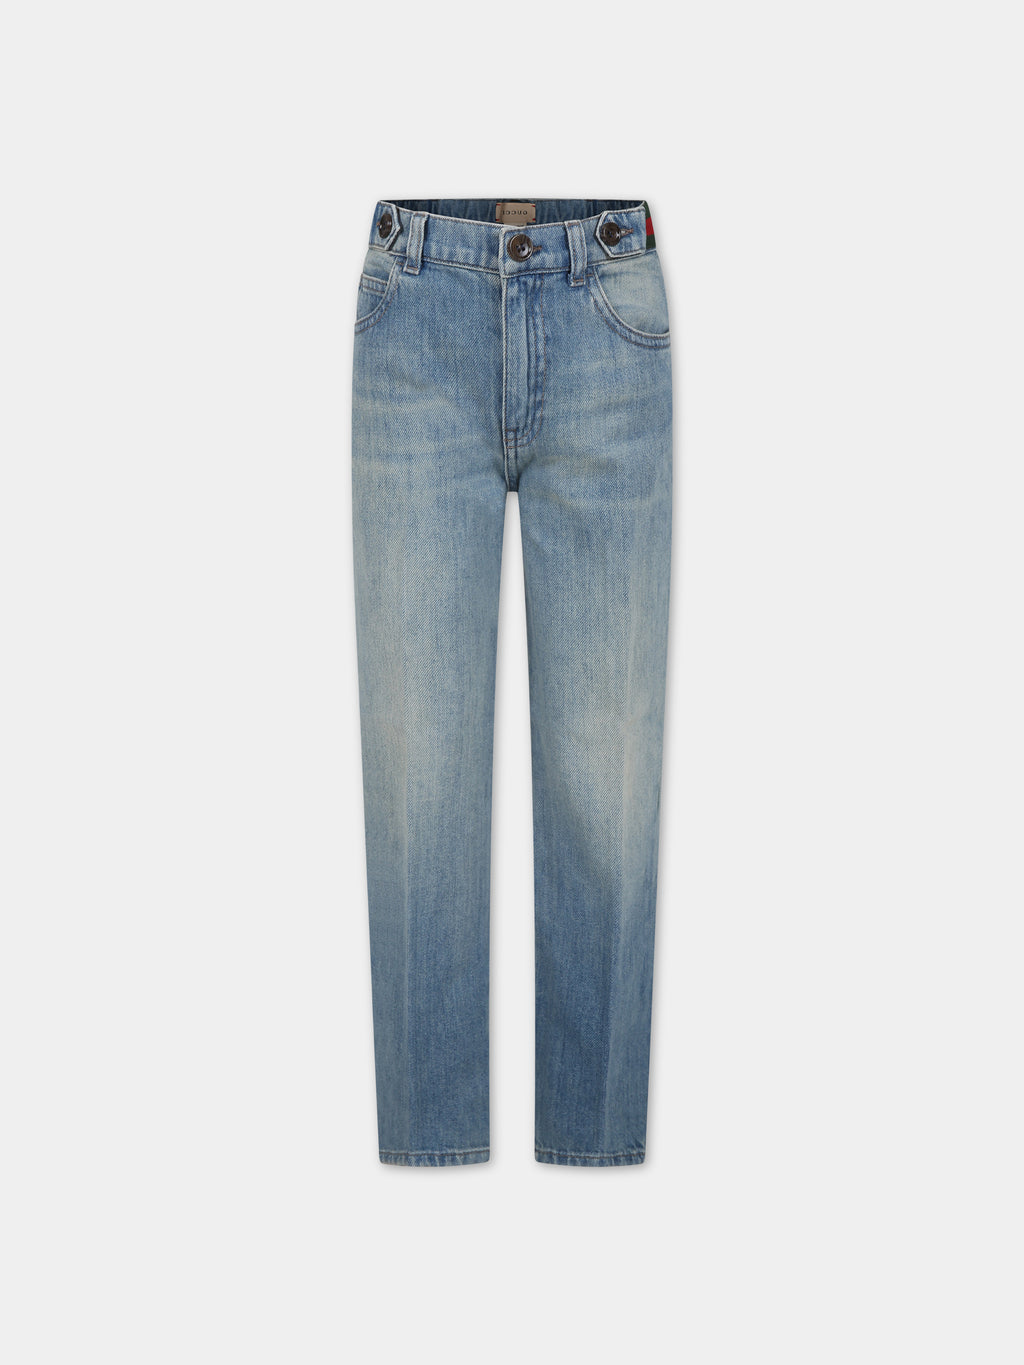 Blue jeans for boy with Web detail